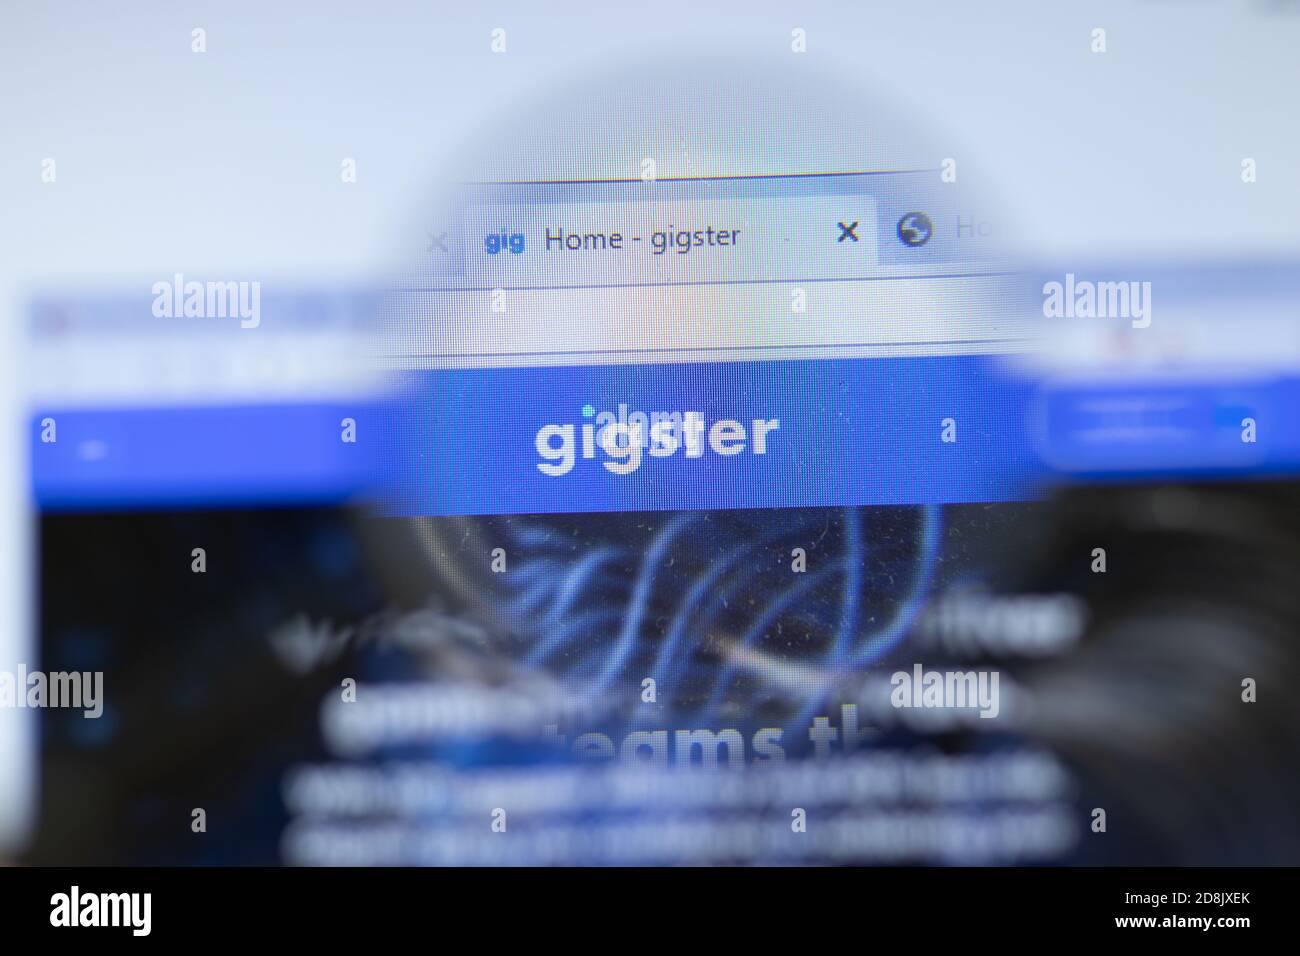 New York, USA - 26 October 2020: gigster company website with logo close up, Illustrative Editorial Stock Photo